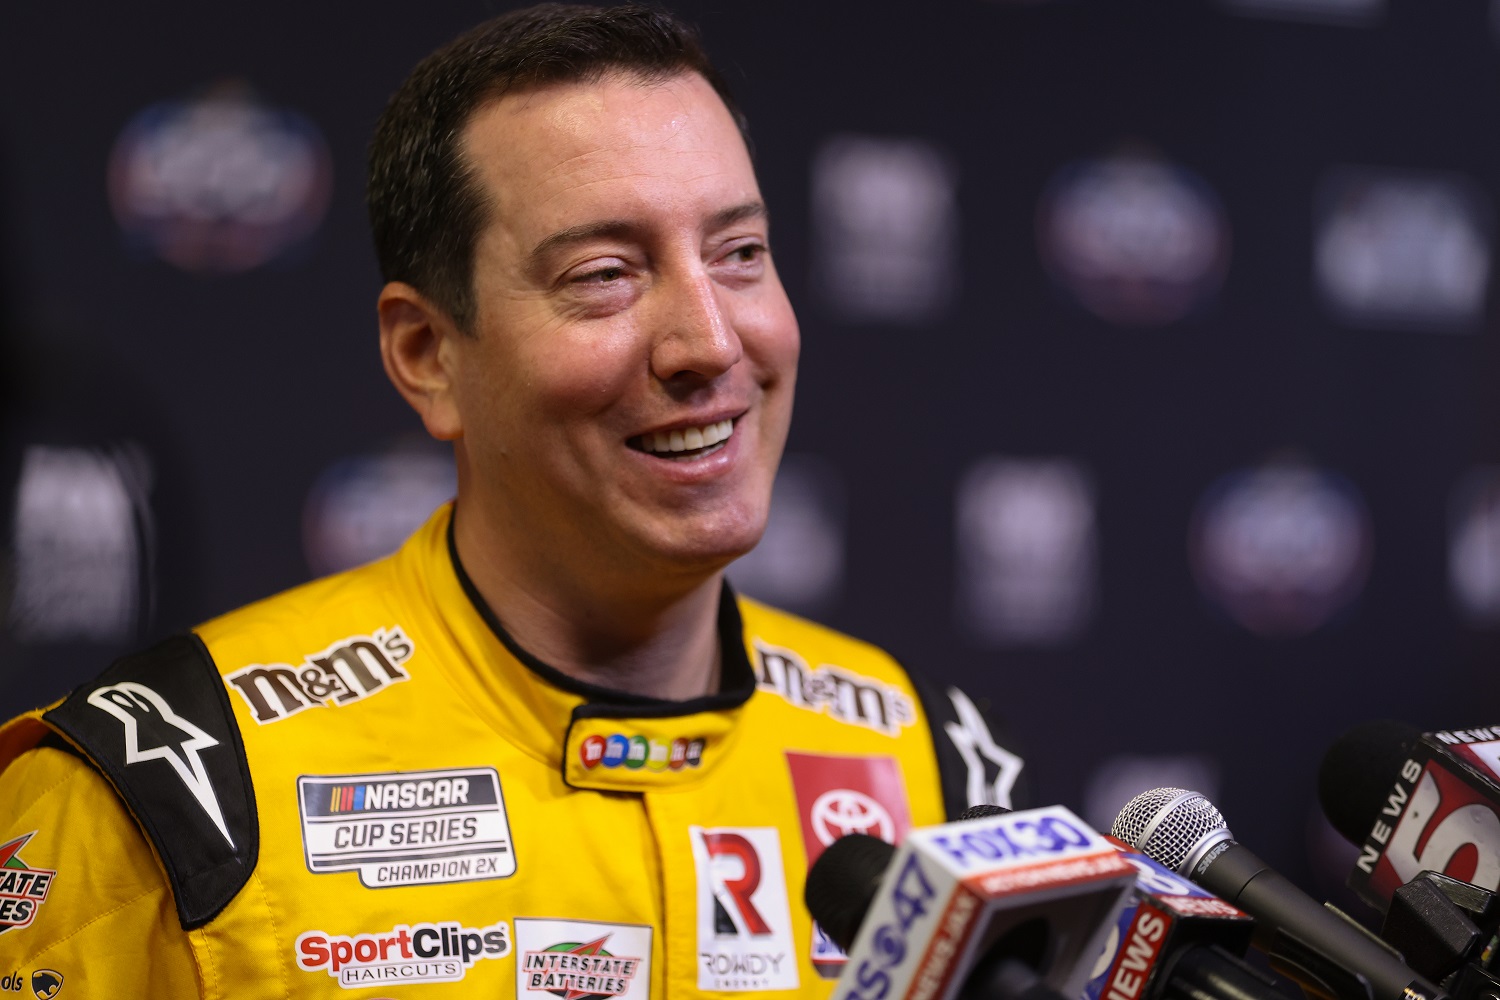 Kyle Busch, driver of the No. 18 Toyota, speaks to the media during the NASCAR Cup Series Daytona 500 Media Day.